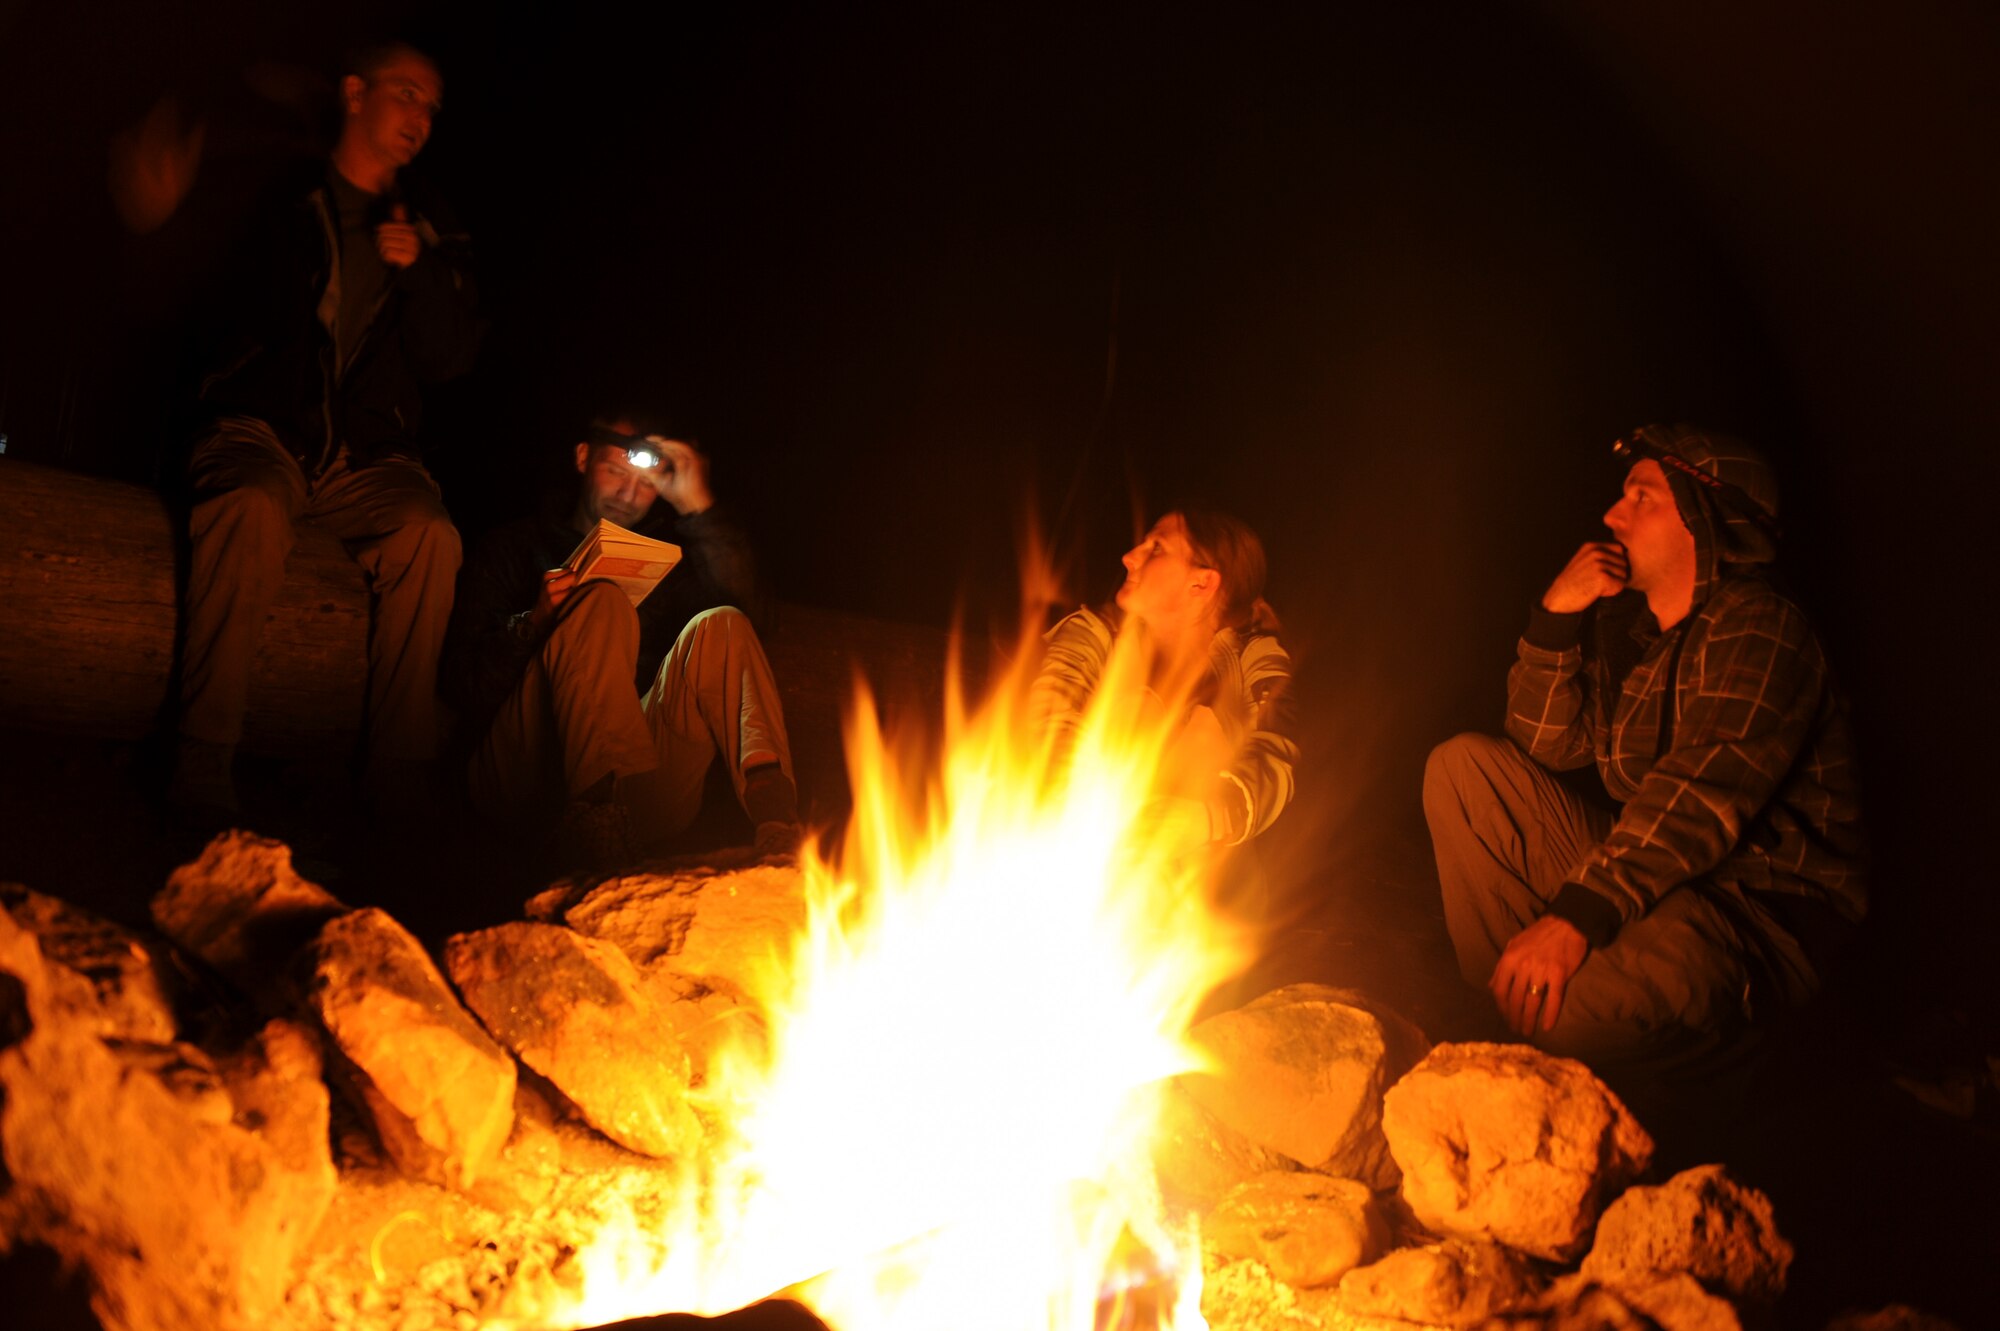 Participants of the U.S. Air Force 50 Summits Challenge converse around a fire at Fort Tuthill County Park Ariz., May 28, 2016. The group of participants consisting of U.S. Airmen, veterans and civilians camped out the night before summiting Humphreys Peak, the highest point in Arizona. (U.S. Air Force photo by Airman 1st Class Ashley N. Steffen/Released)